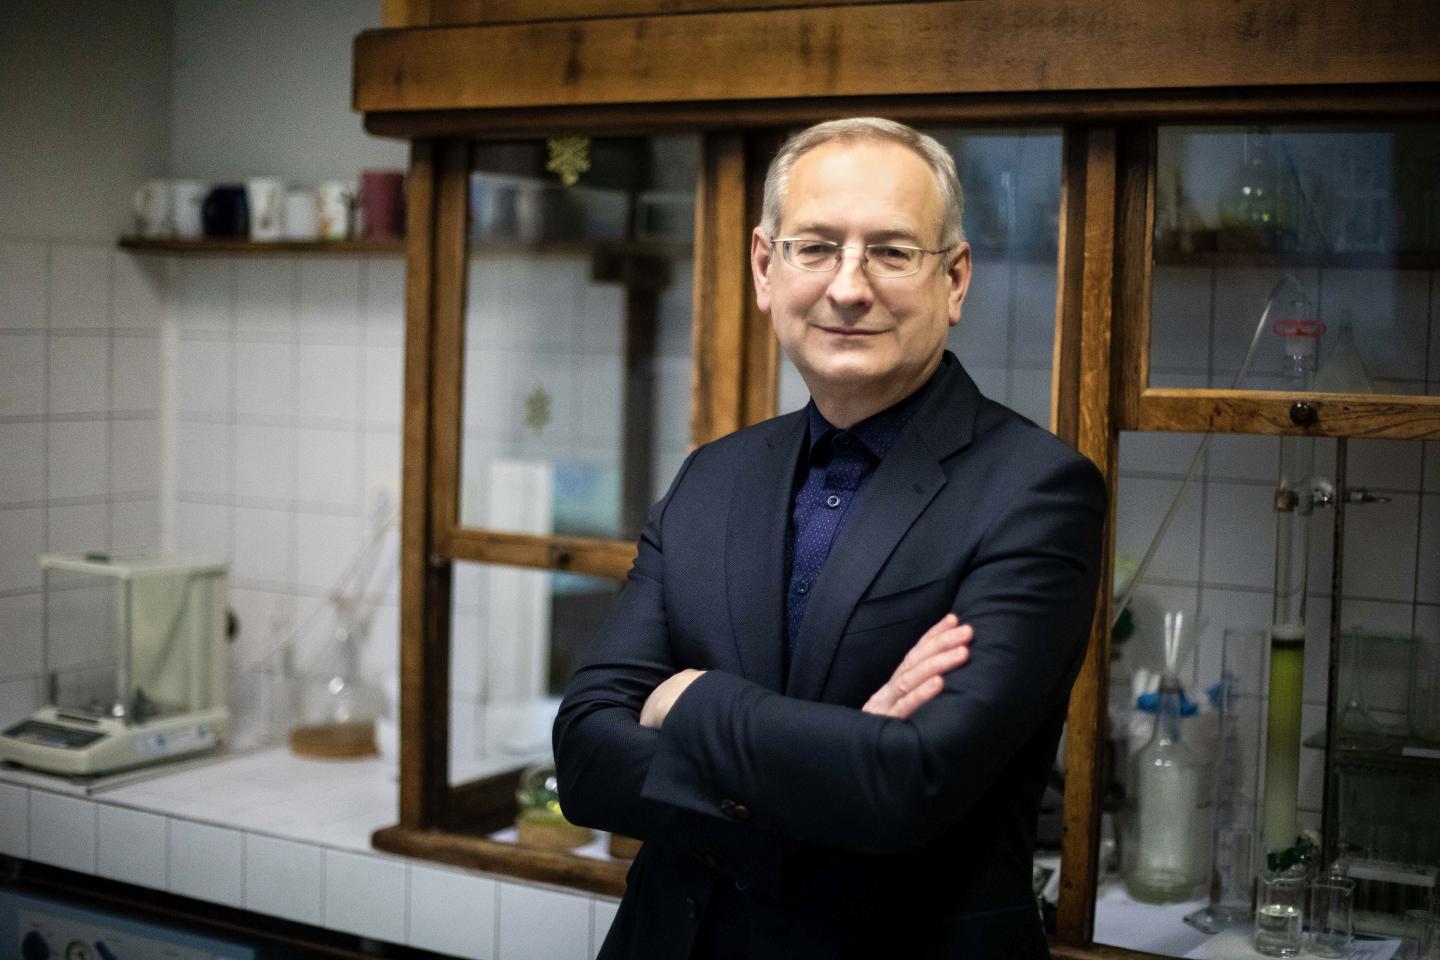 Professor Vytautas Getautis, the head of the KTU research group behind the invention